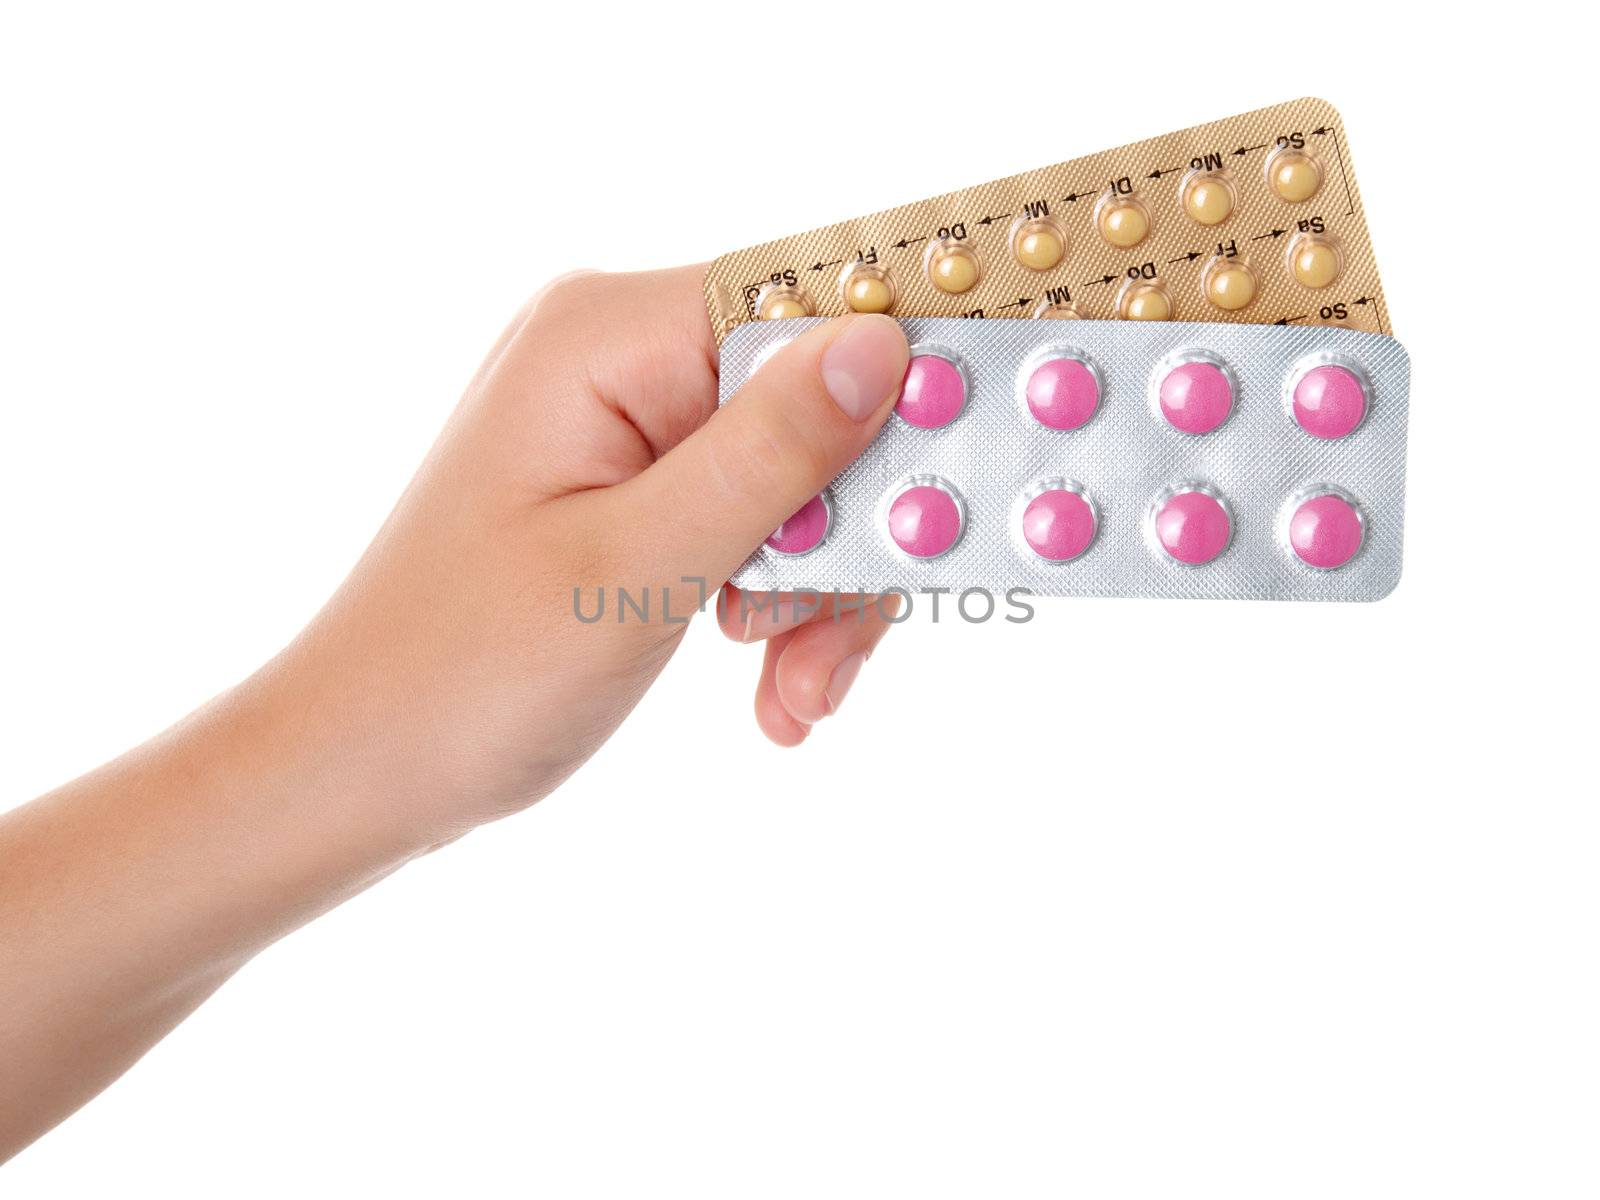 tablets (Birth Control Pills) in the hand, isolated on white background  by motorolka